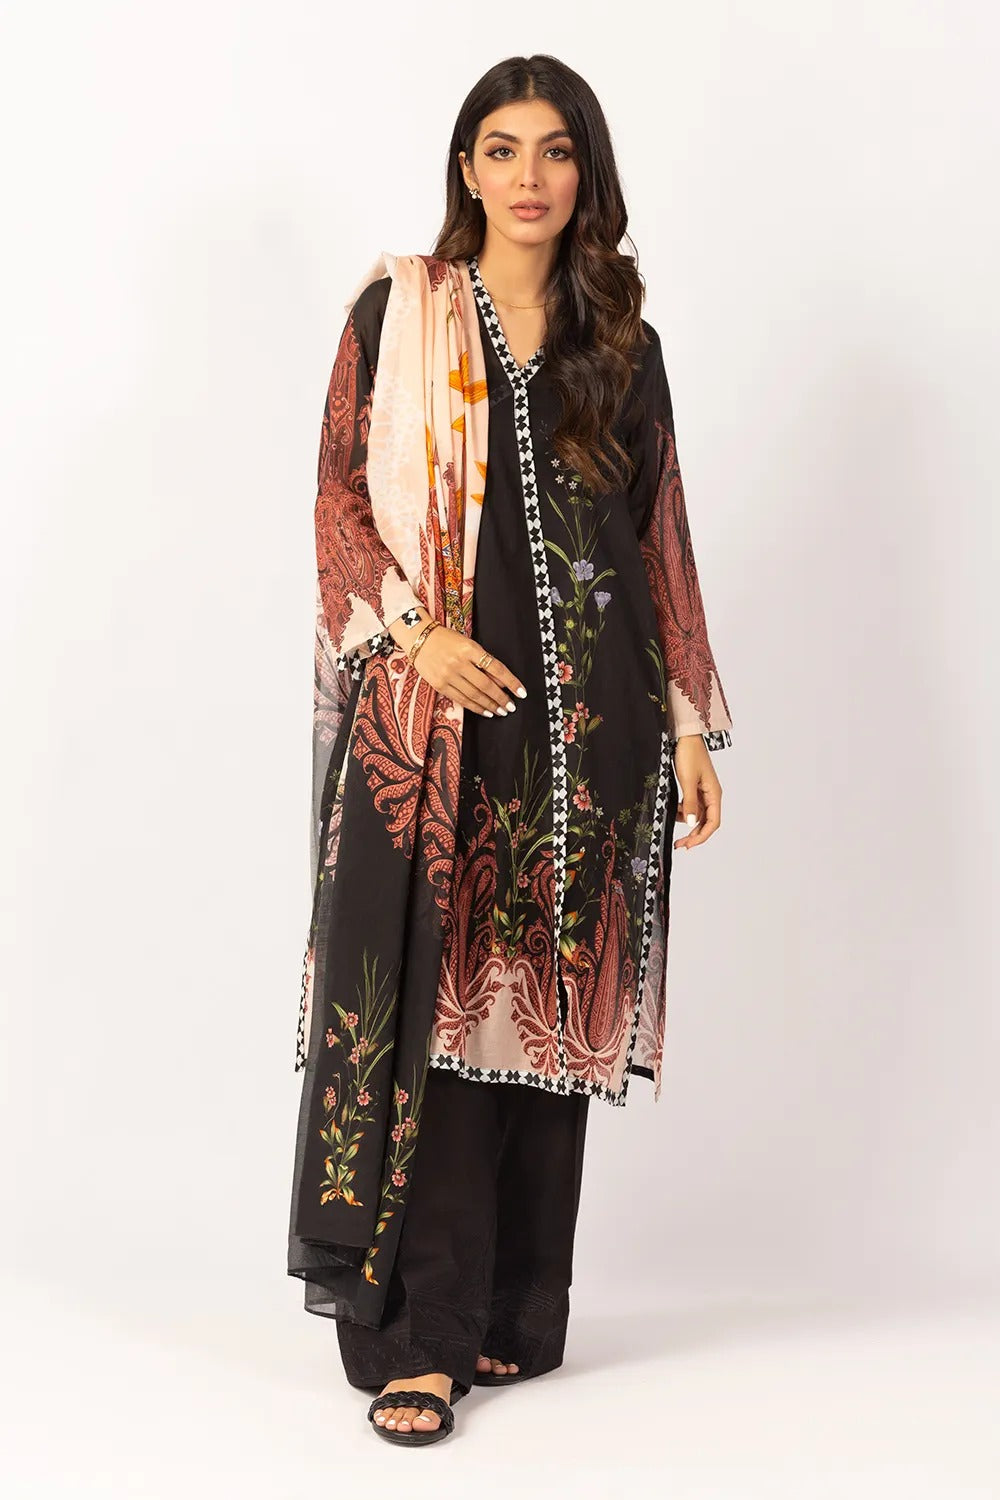 Gul Ahmed Kaaj 02 Piece Stitched Printed Cotton Shirt With Lawn Dupatta IPS-21-49 DP